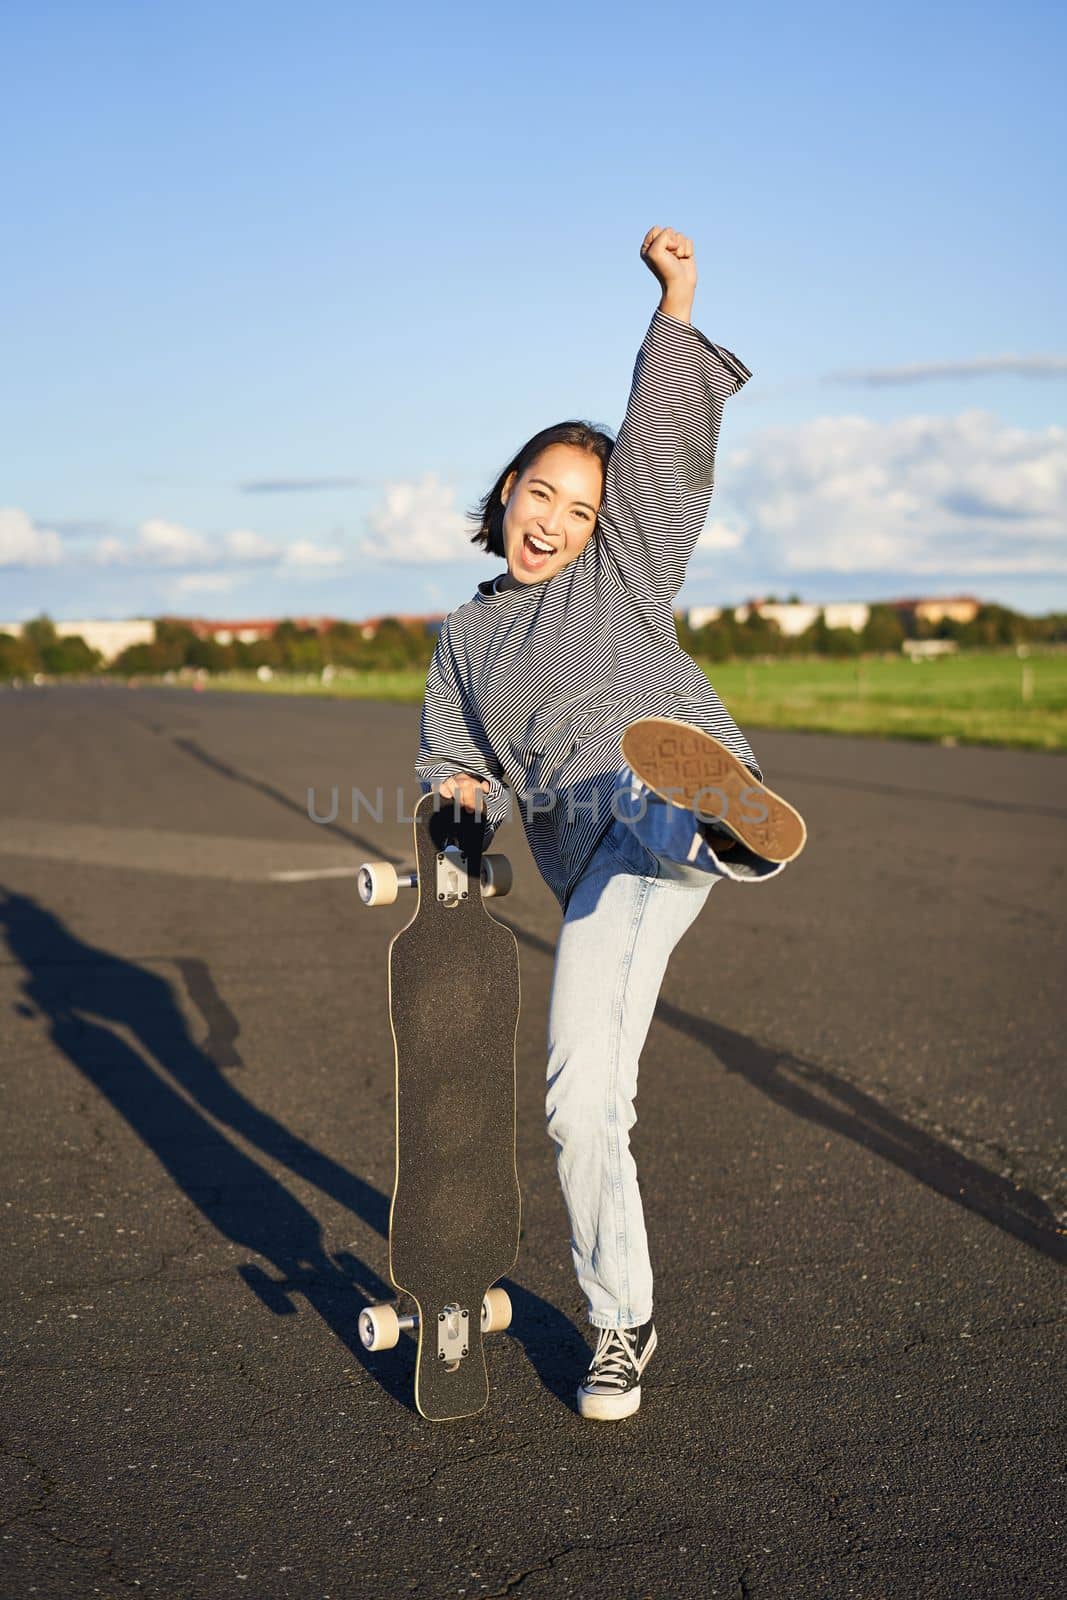 Vertical shot of asian girl feeling excited, skating on longboard, jumping and posing with skateboard, standing with cruiser on empty road, having fun outdoors.